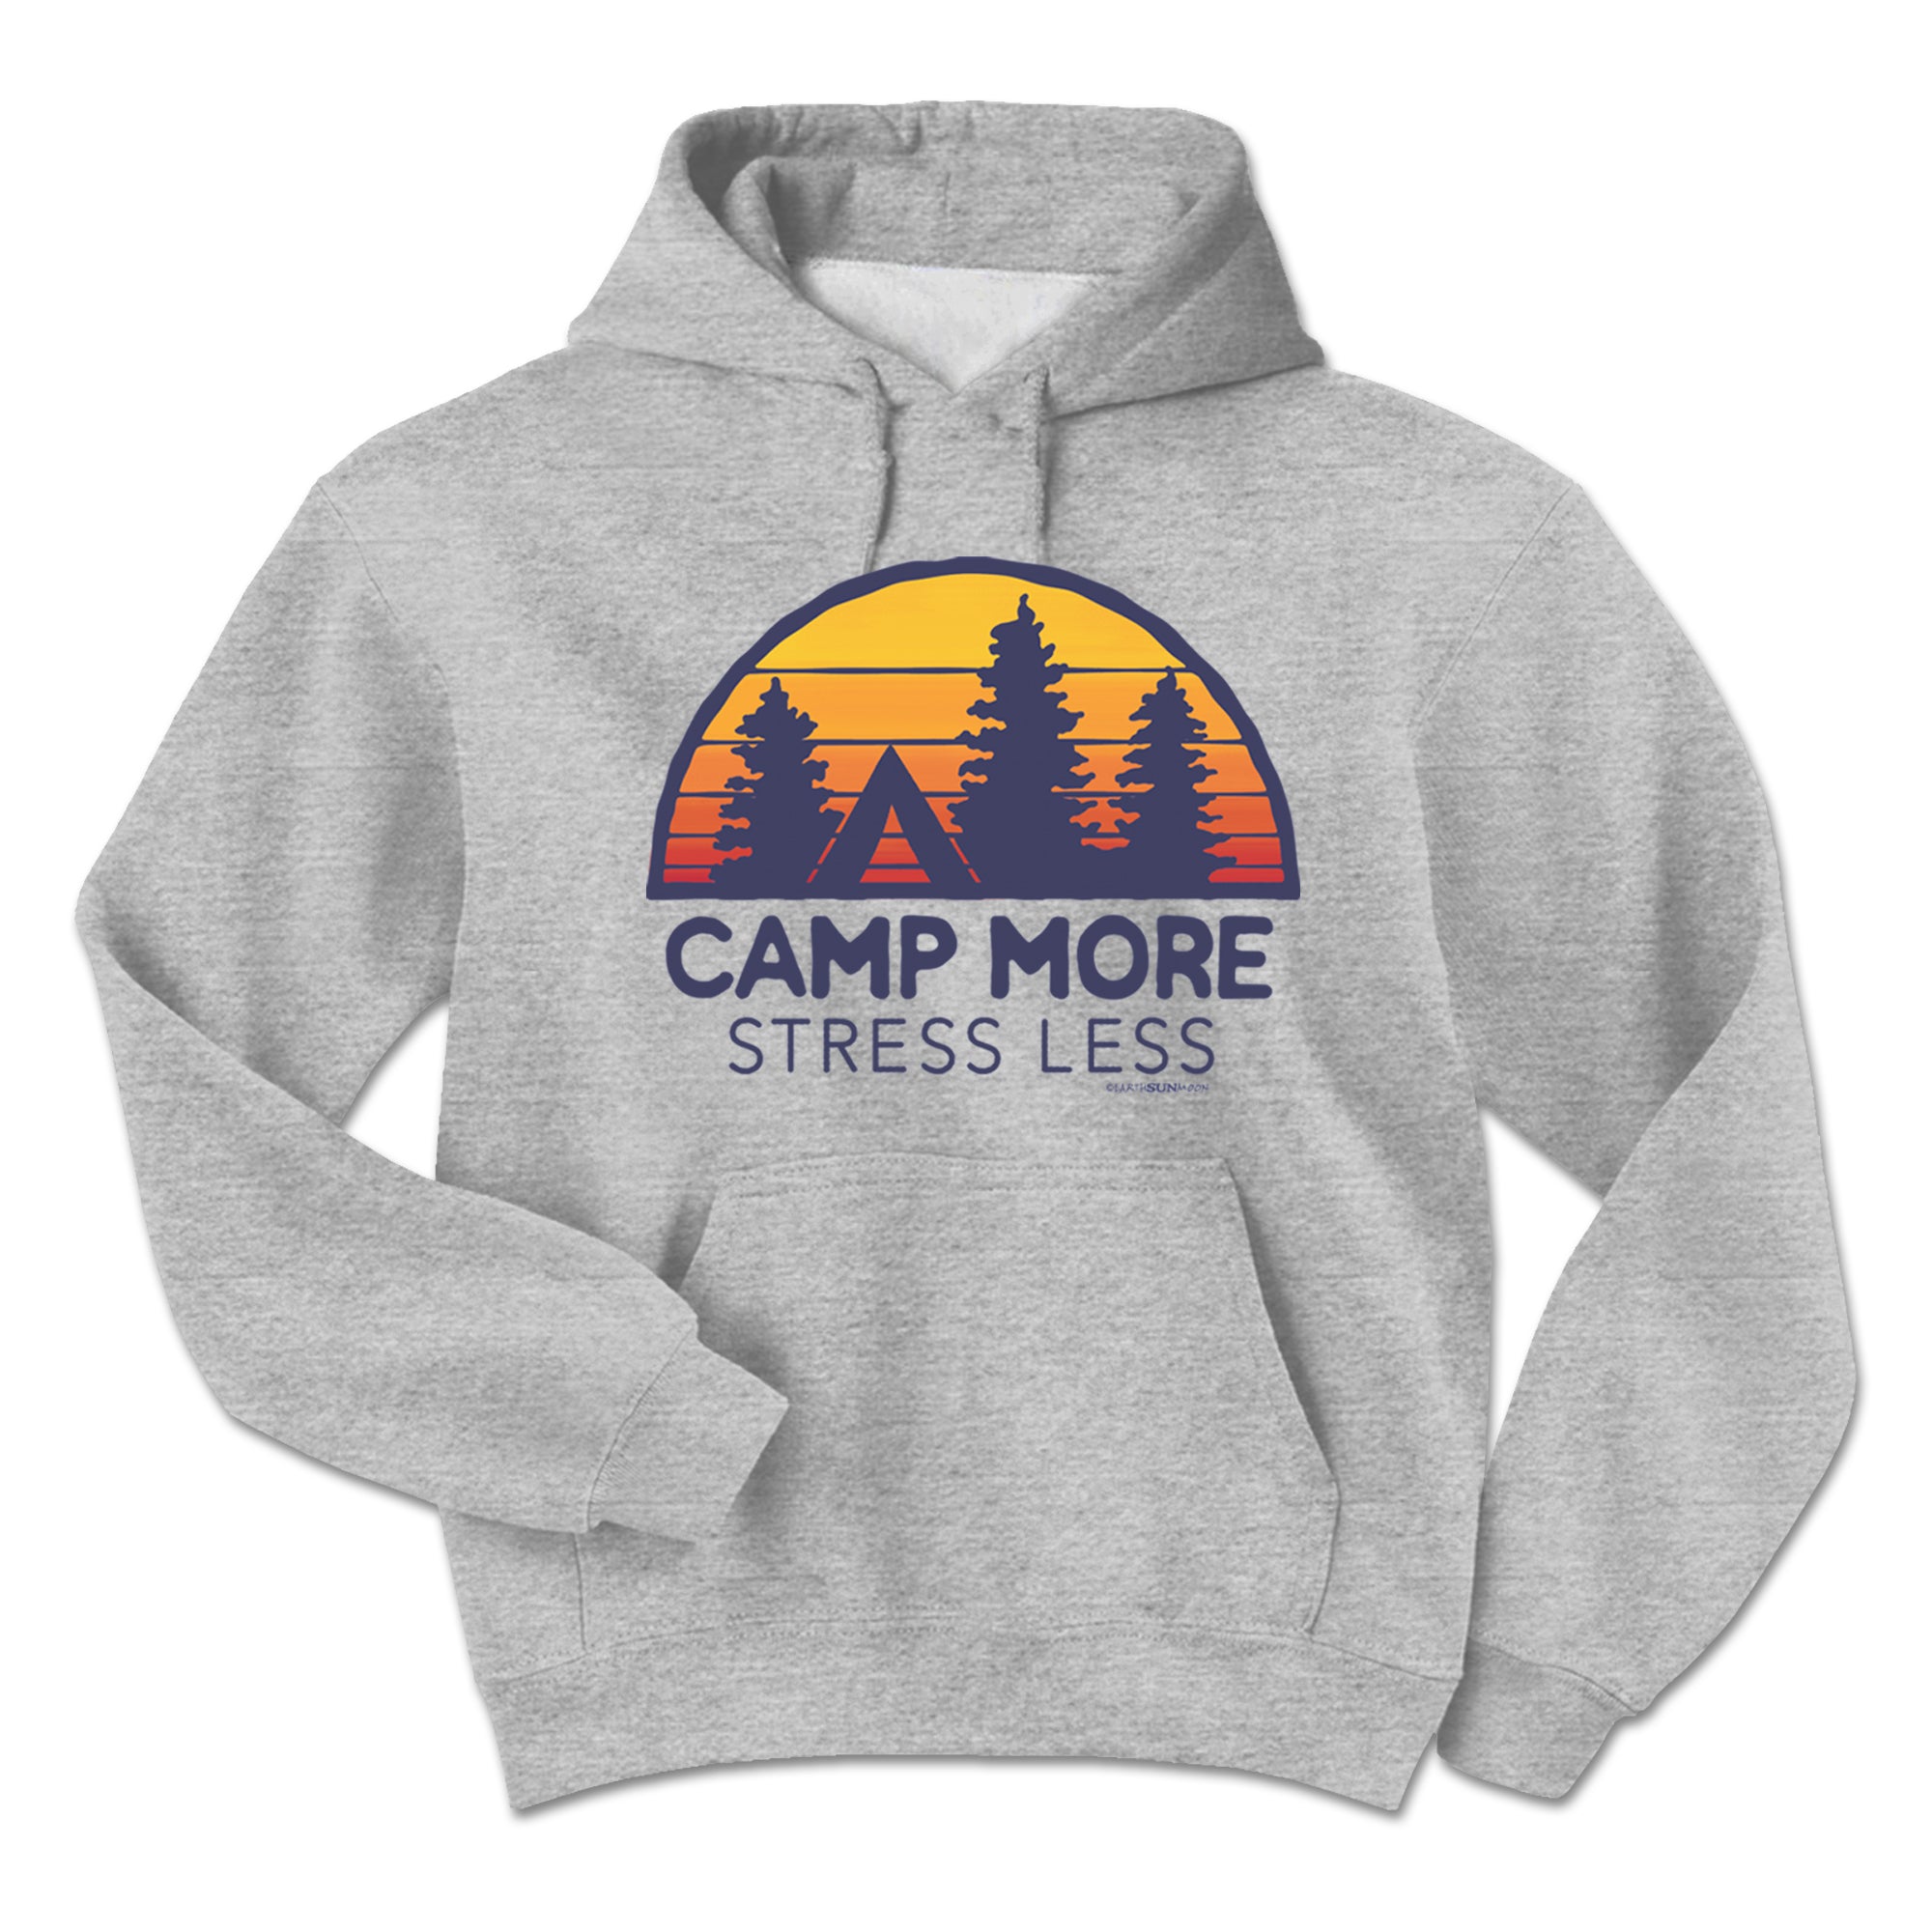 Earth Sun Moon Camp More Stress Less Adult Hoodie - Sports Grey - XXL